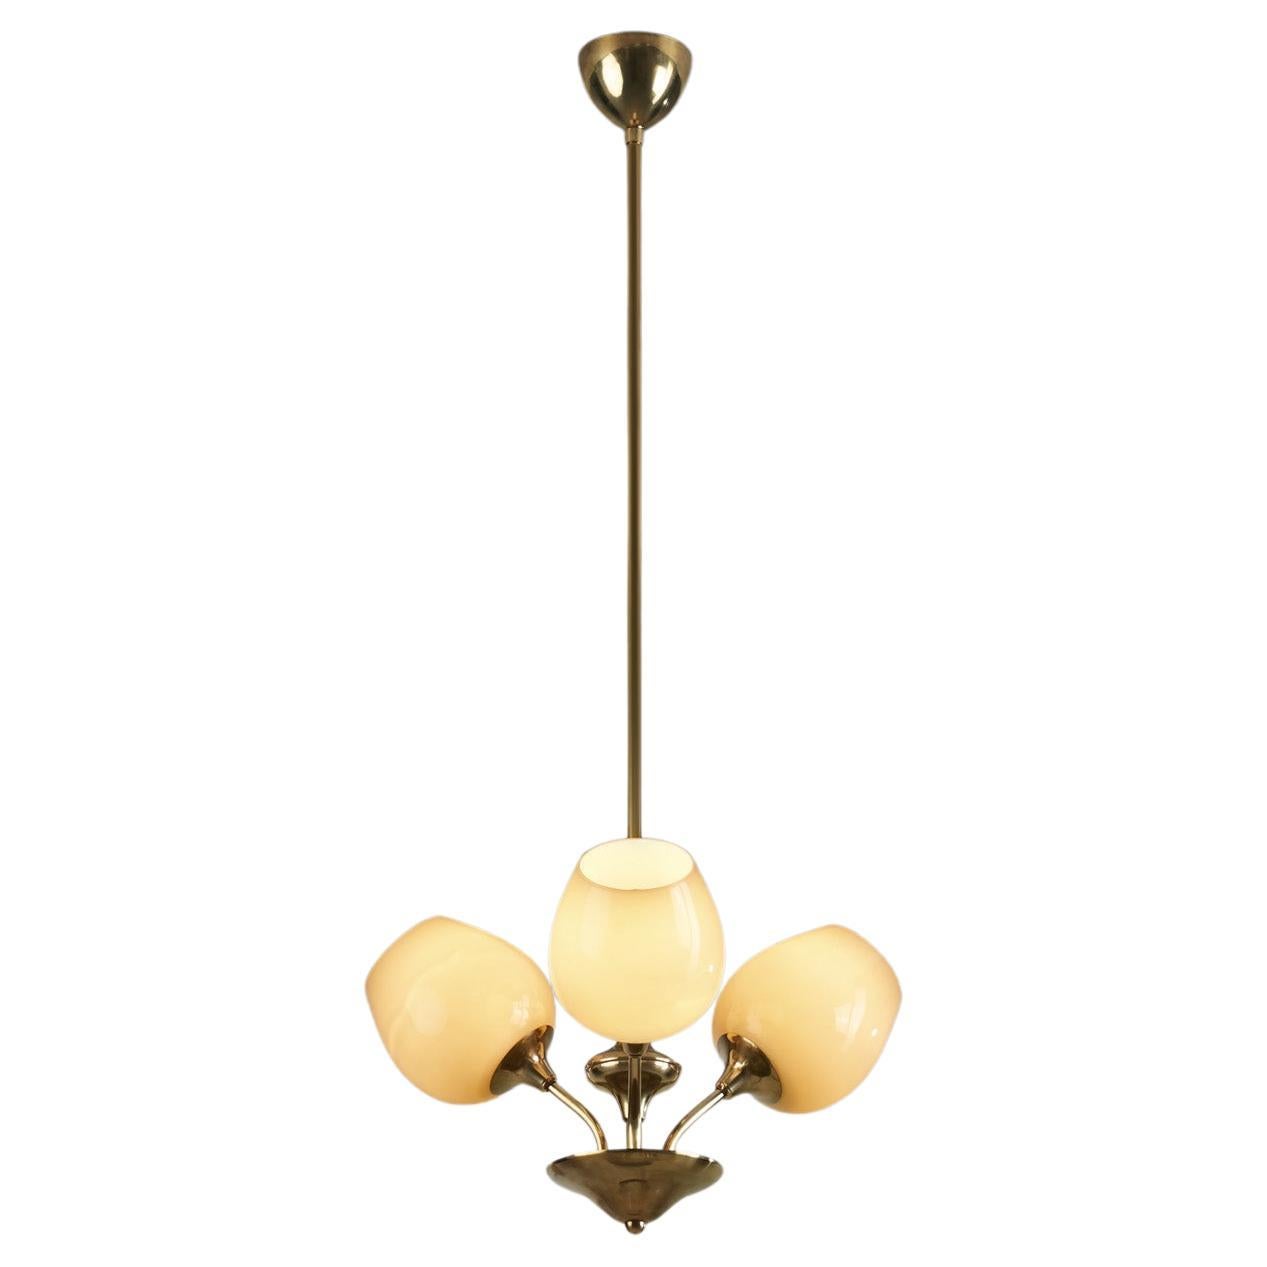 Brass Ceiling Lamp with Opal Shades by Itsu 'Attr.', Finland, ca 1950s For Sale